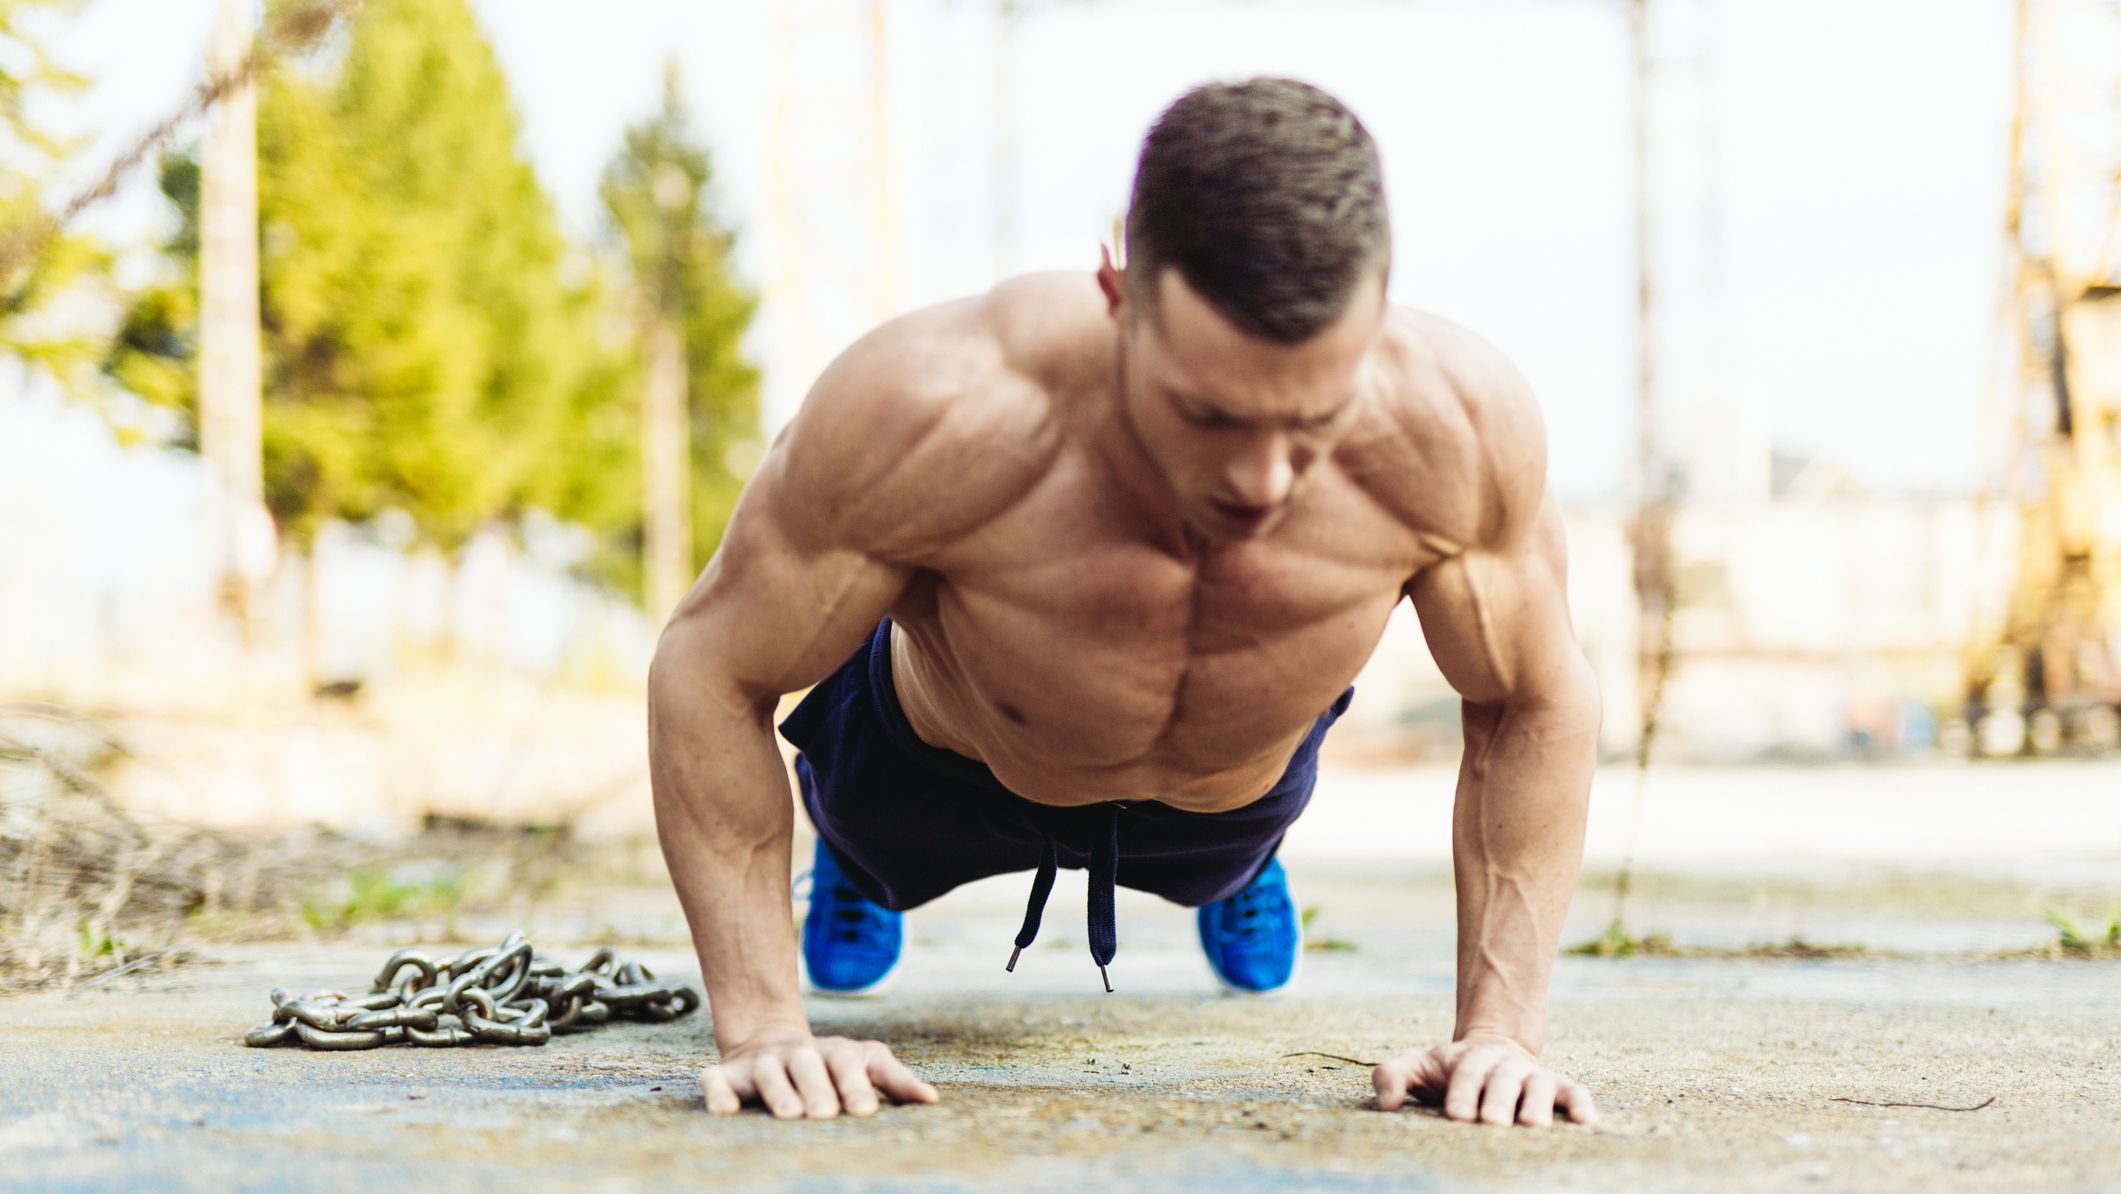 How Many Push-Ups Should I Do a Day to Get Ripped?